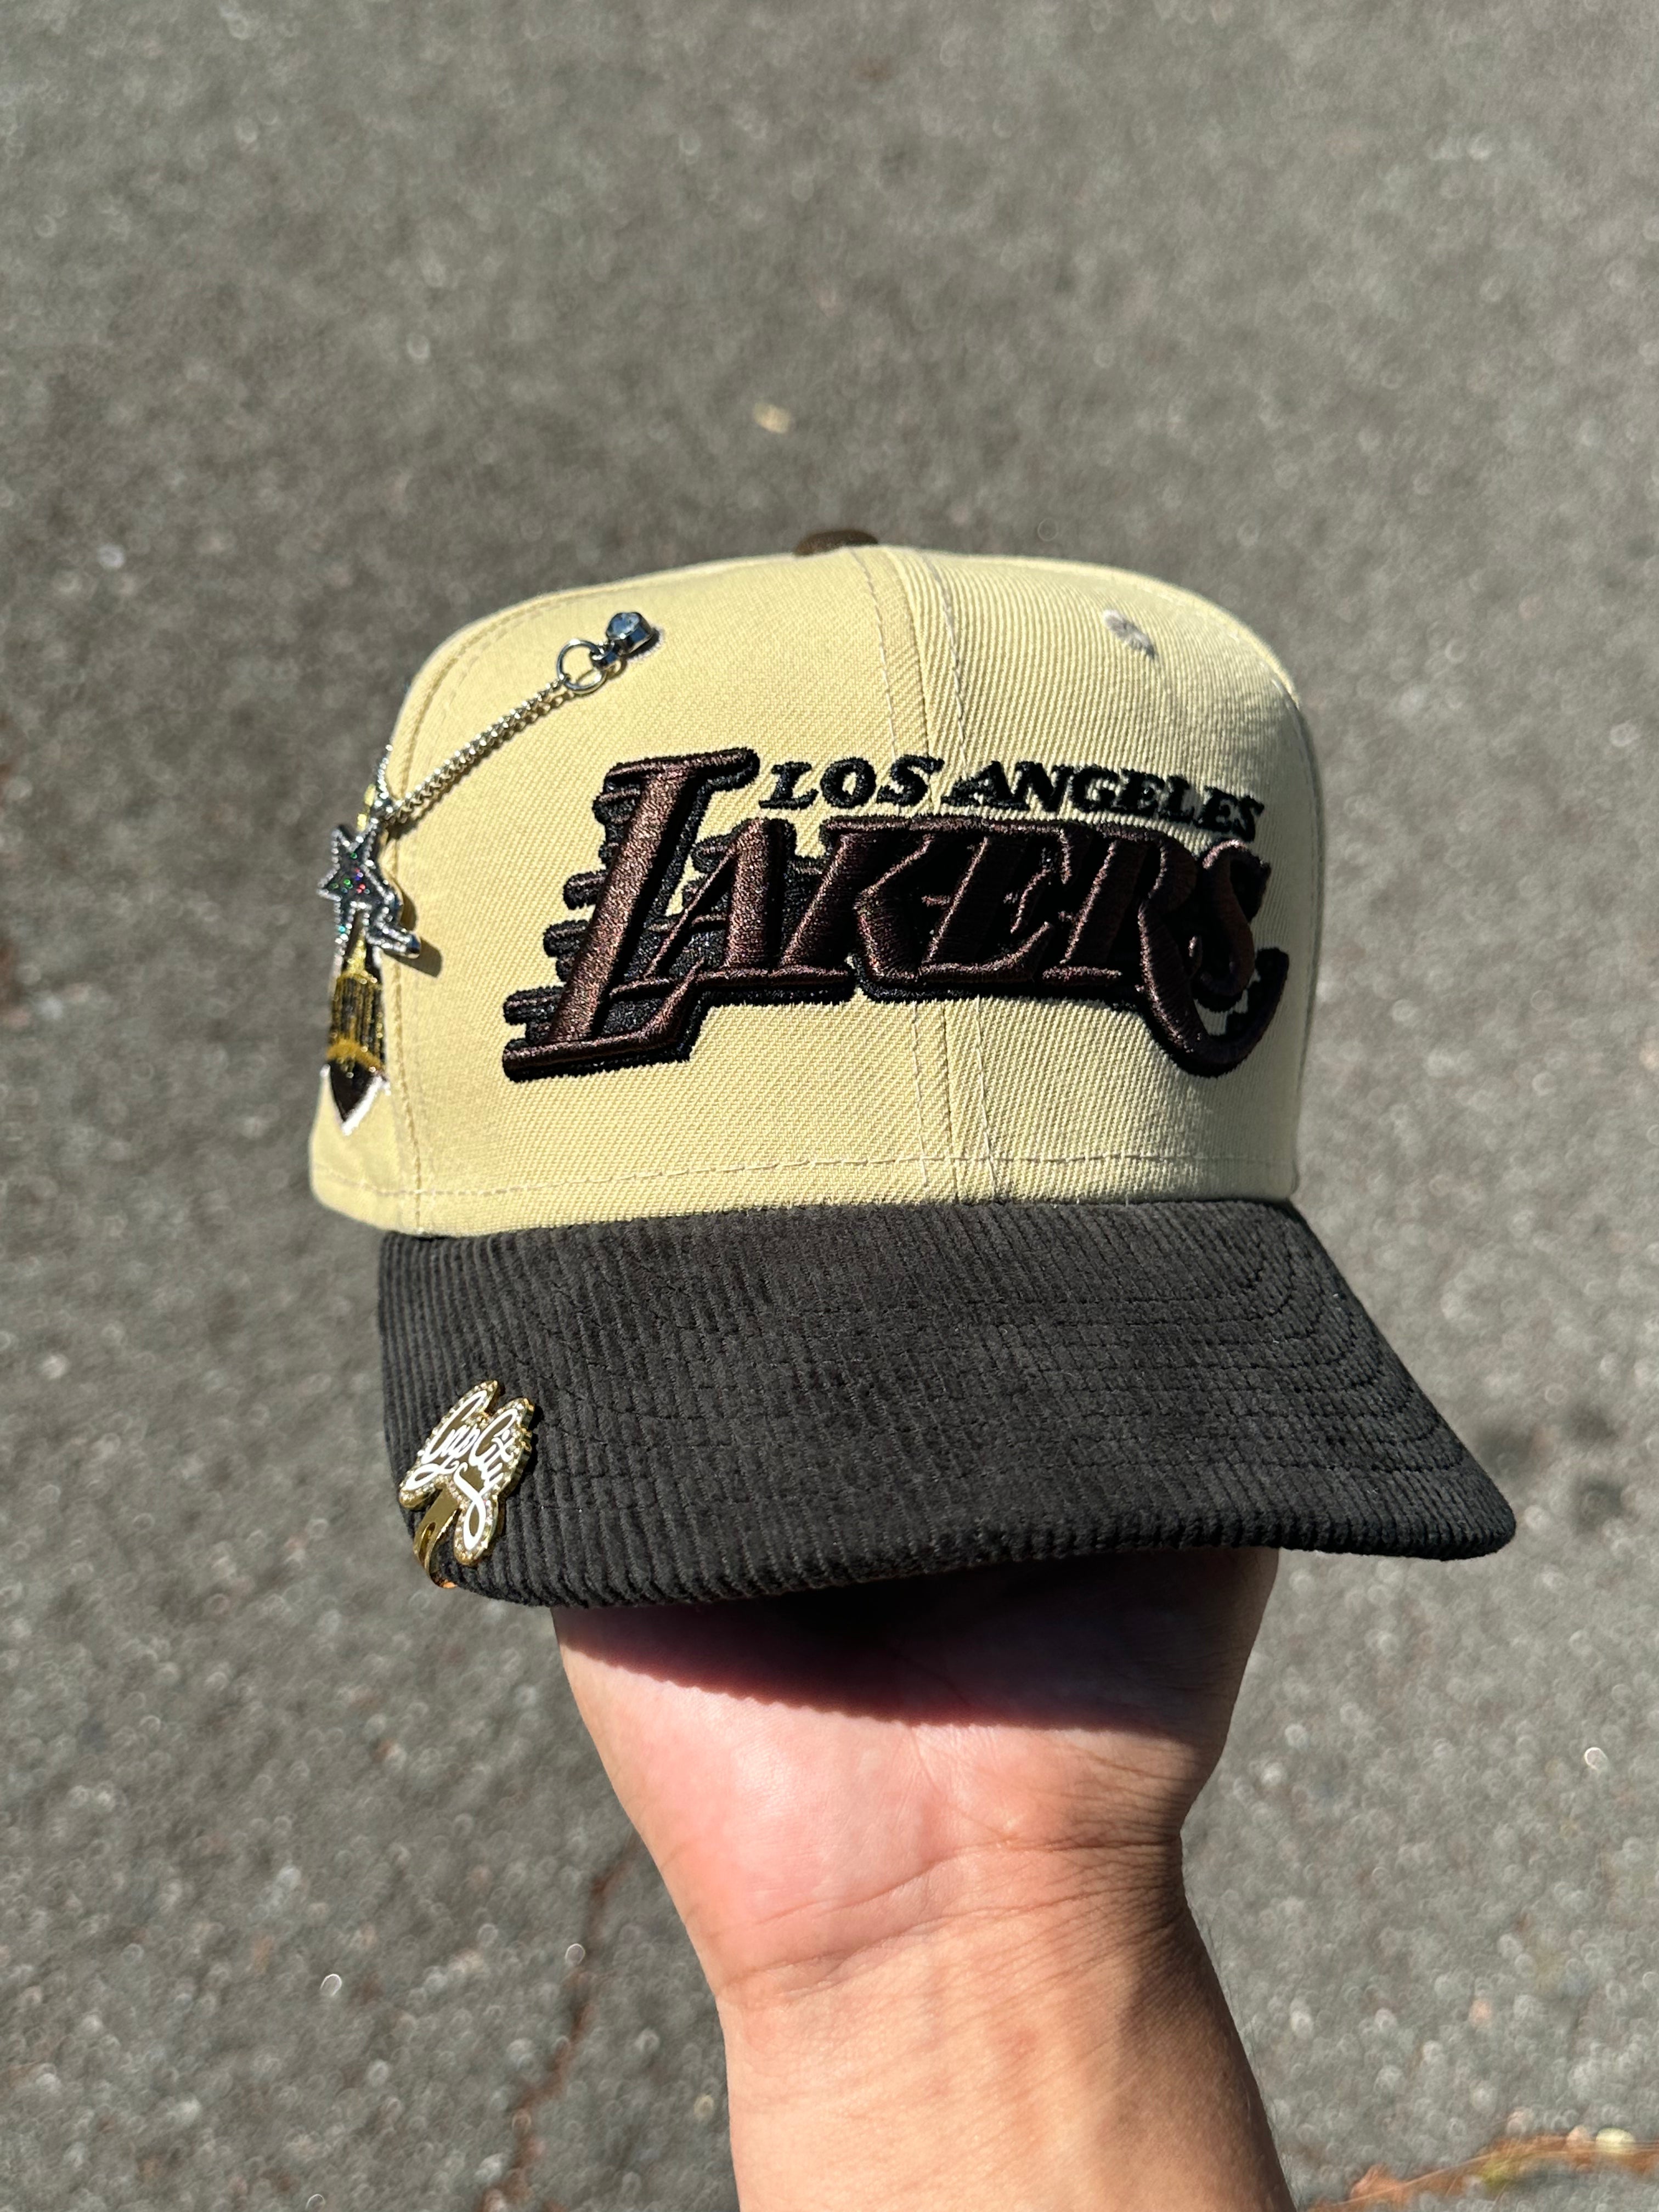 NEW ERA EXCLUSIVE 59FIFTY VEGAS GOLD/BLACK CORDUROY LOS ANGELES LAKERS  W/ 2020 NBA CHAMPIONSHIP SIDE PATCH